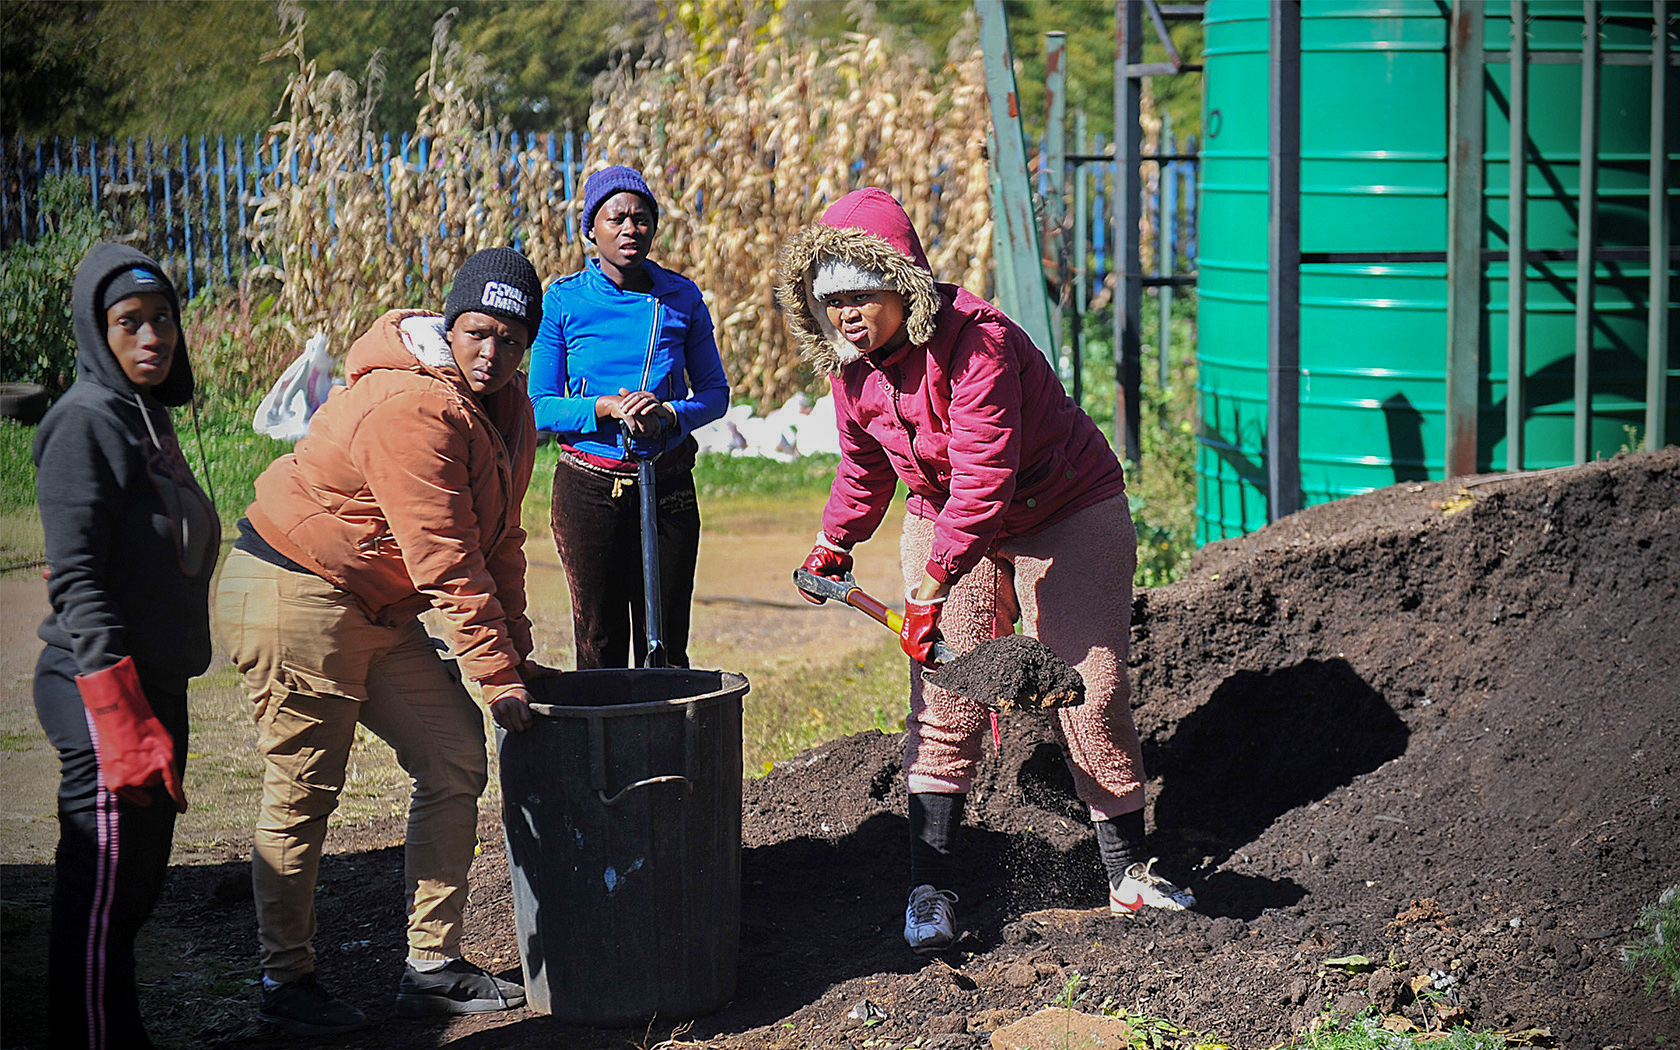 Youth from the community in Bertrams working the land at Bertrams Inner City Farm